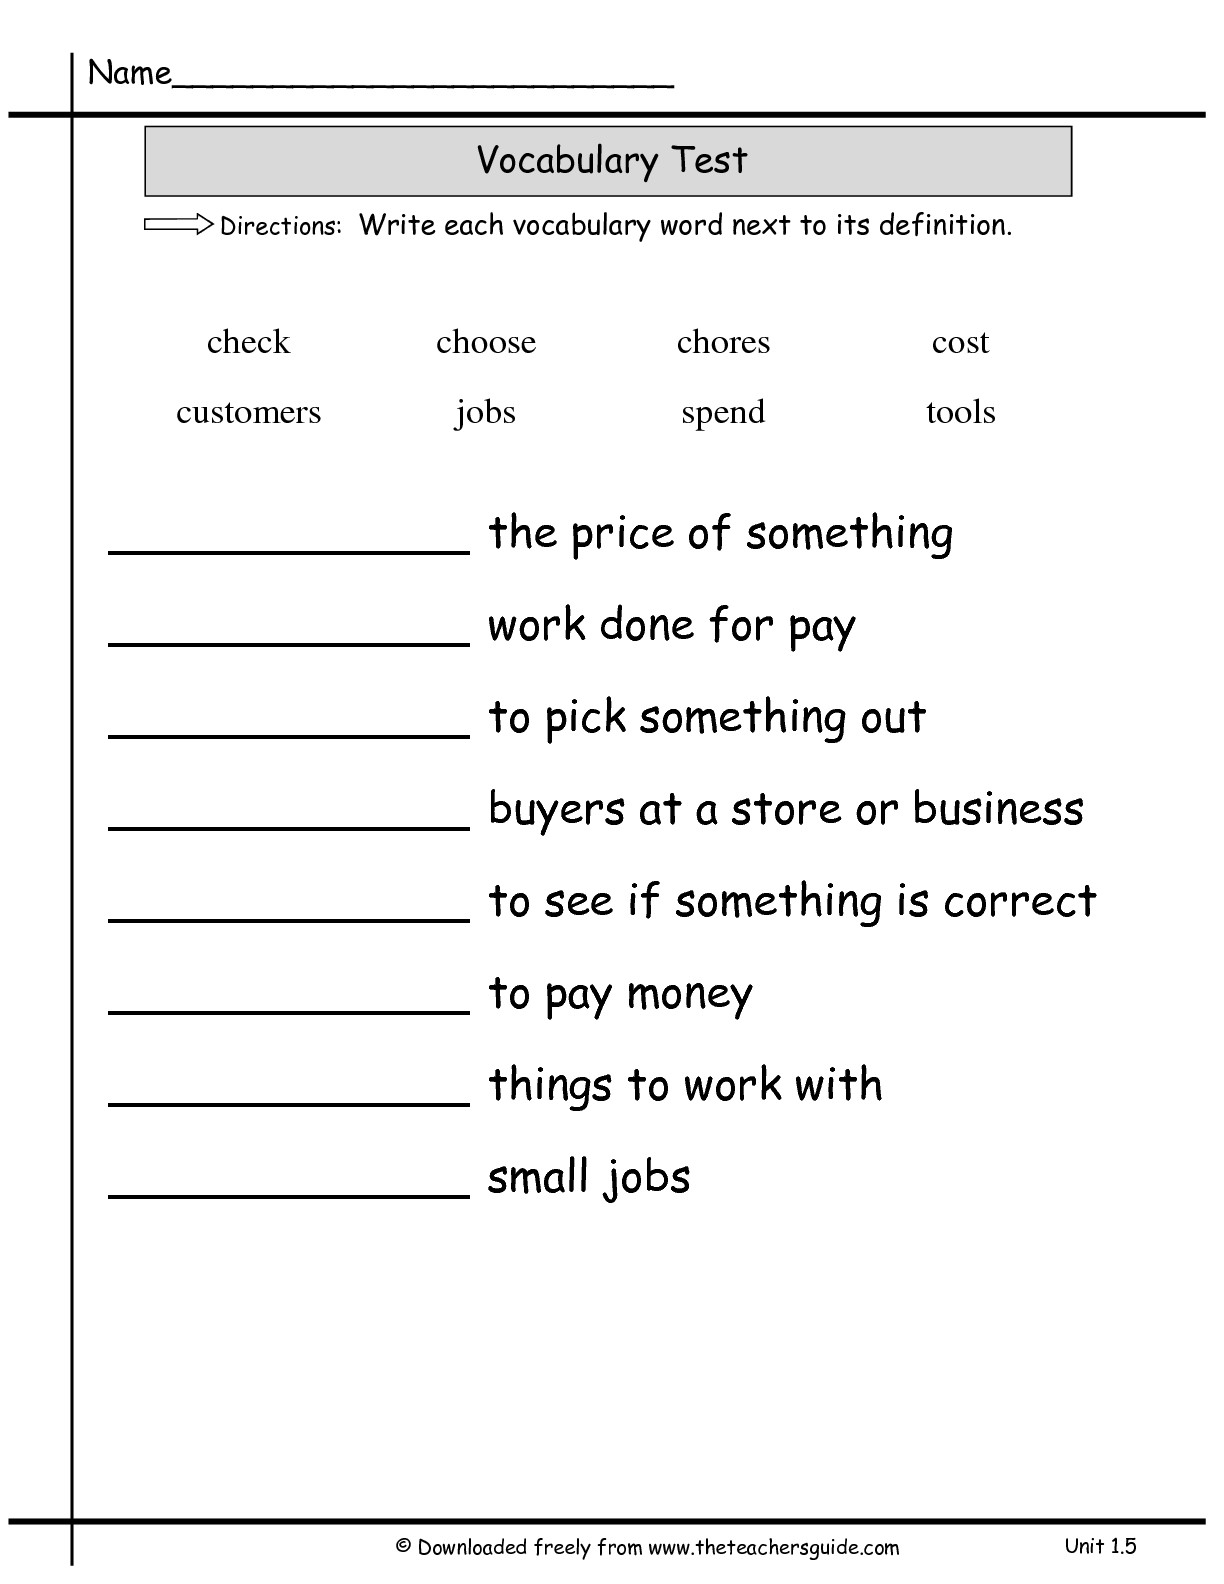 11-vocabulary-word-and-definition-worksheet-worksheeto